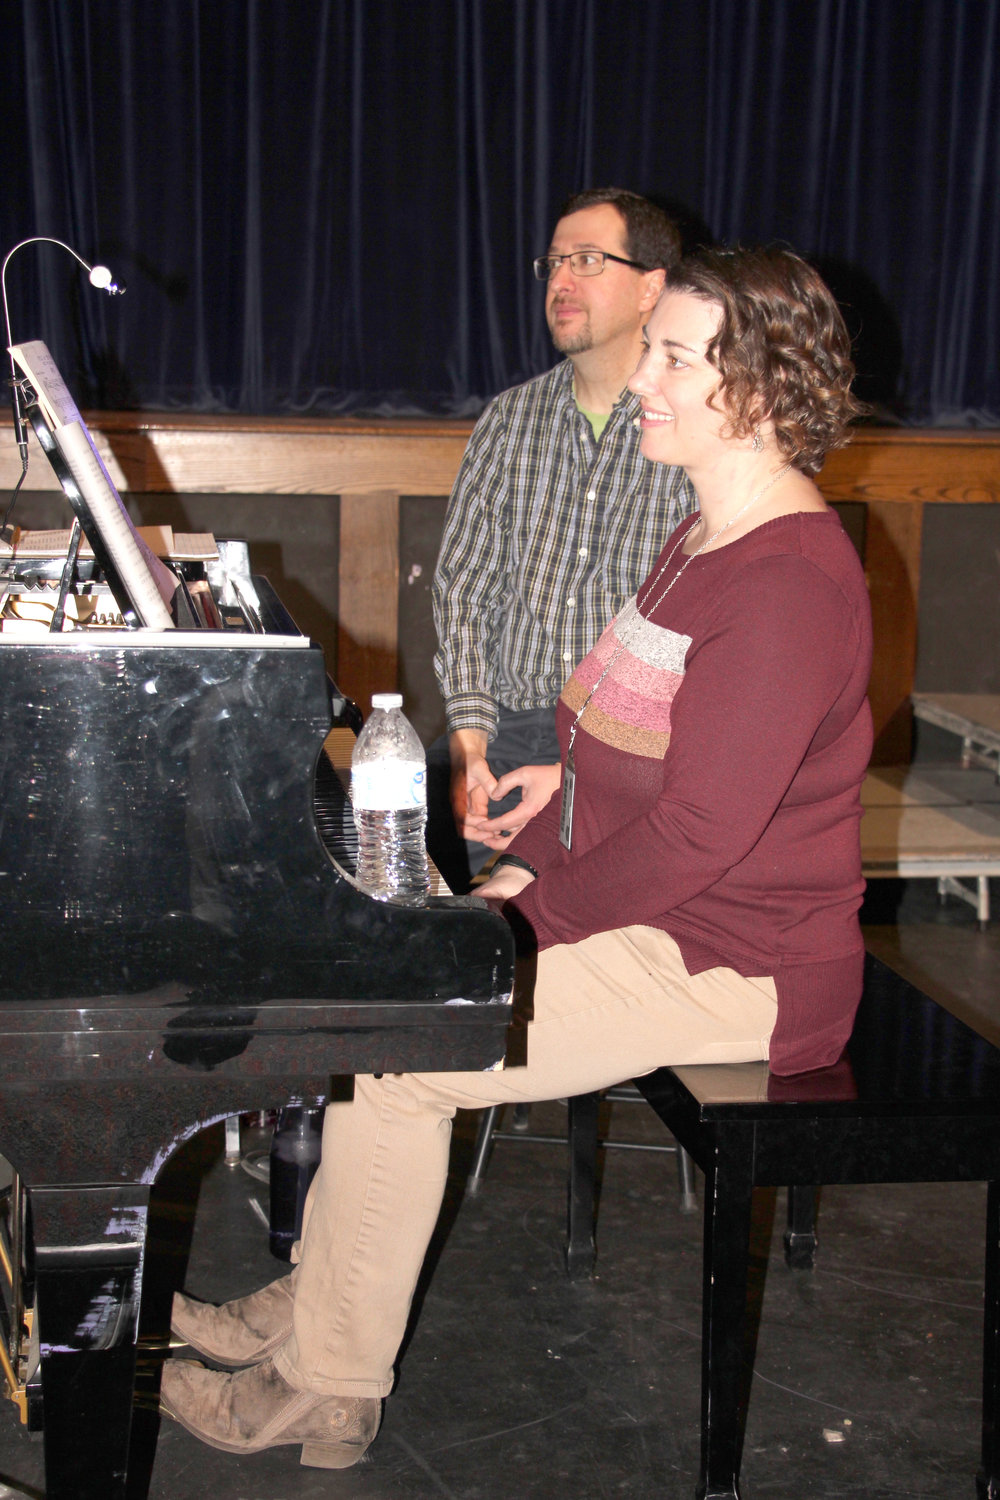 Music teachers Kevin Giroux and Keira Sullivan Weyant accompanied the students on the piano.